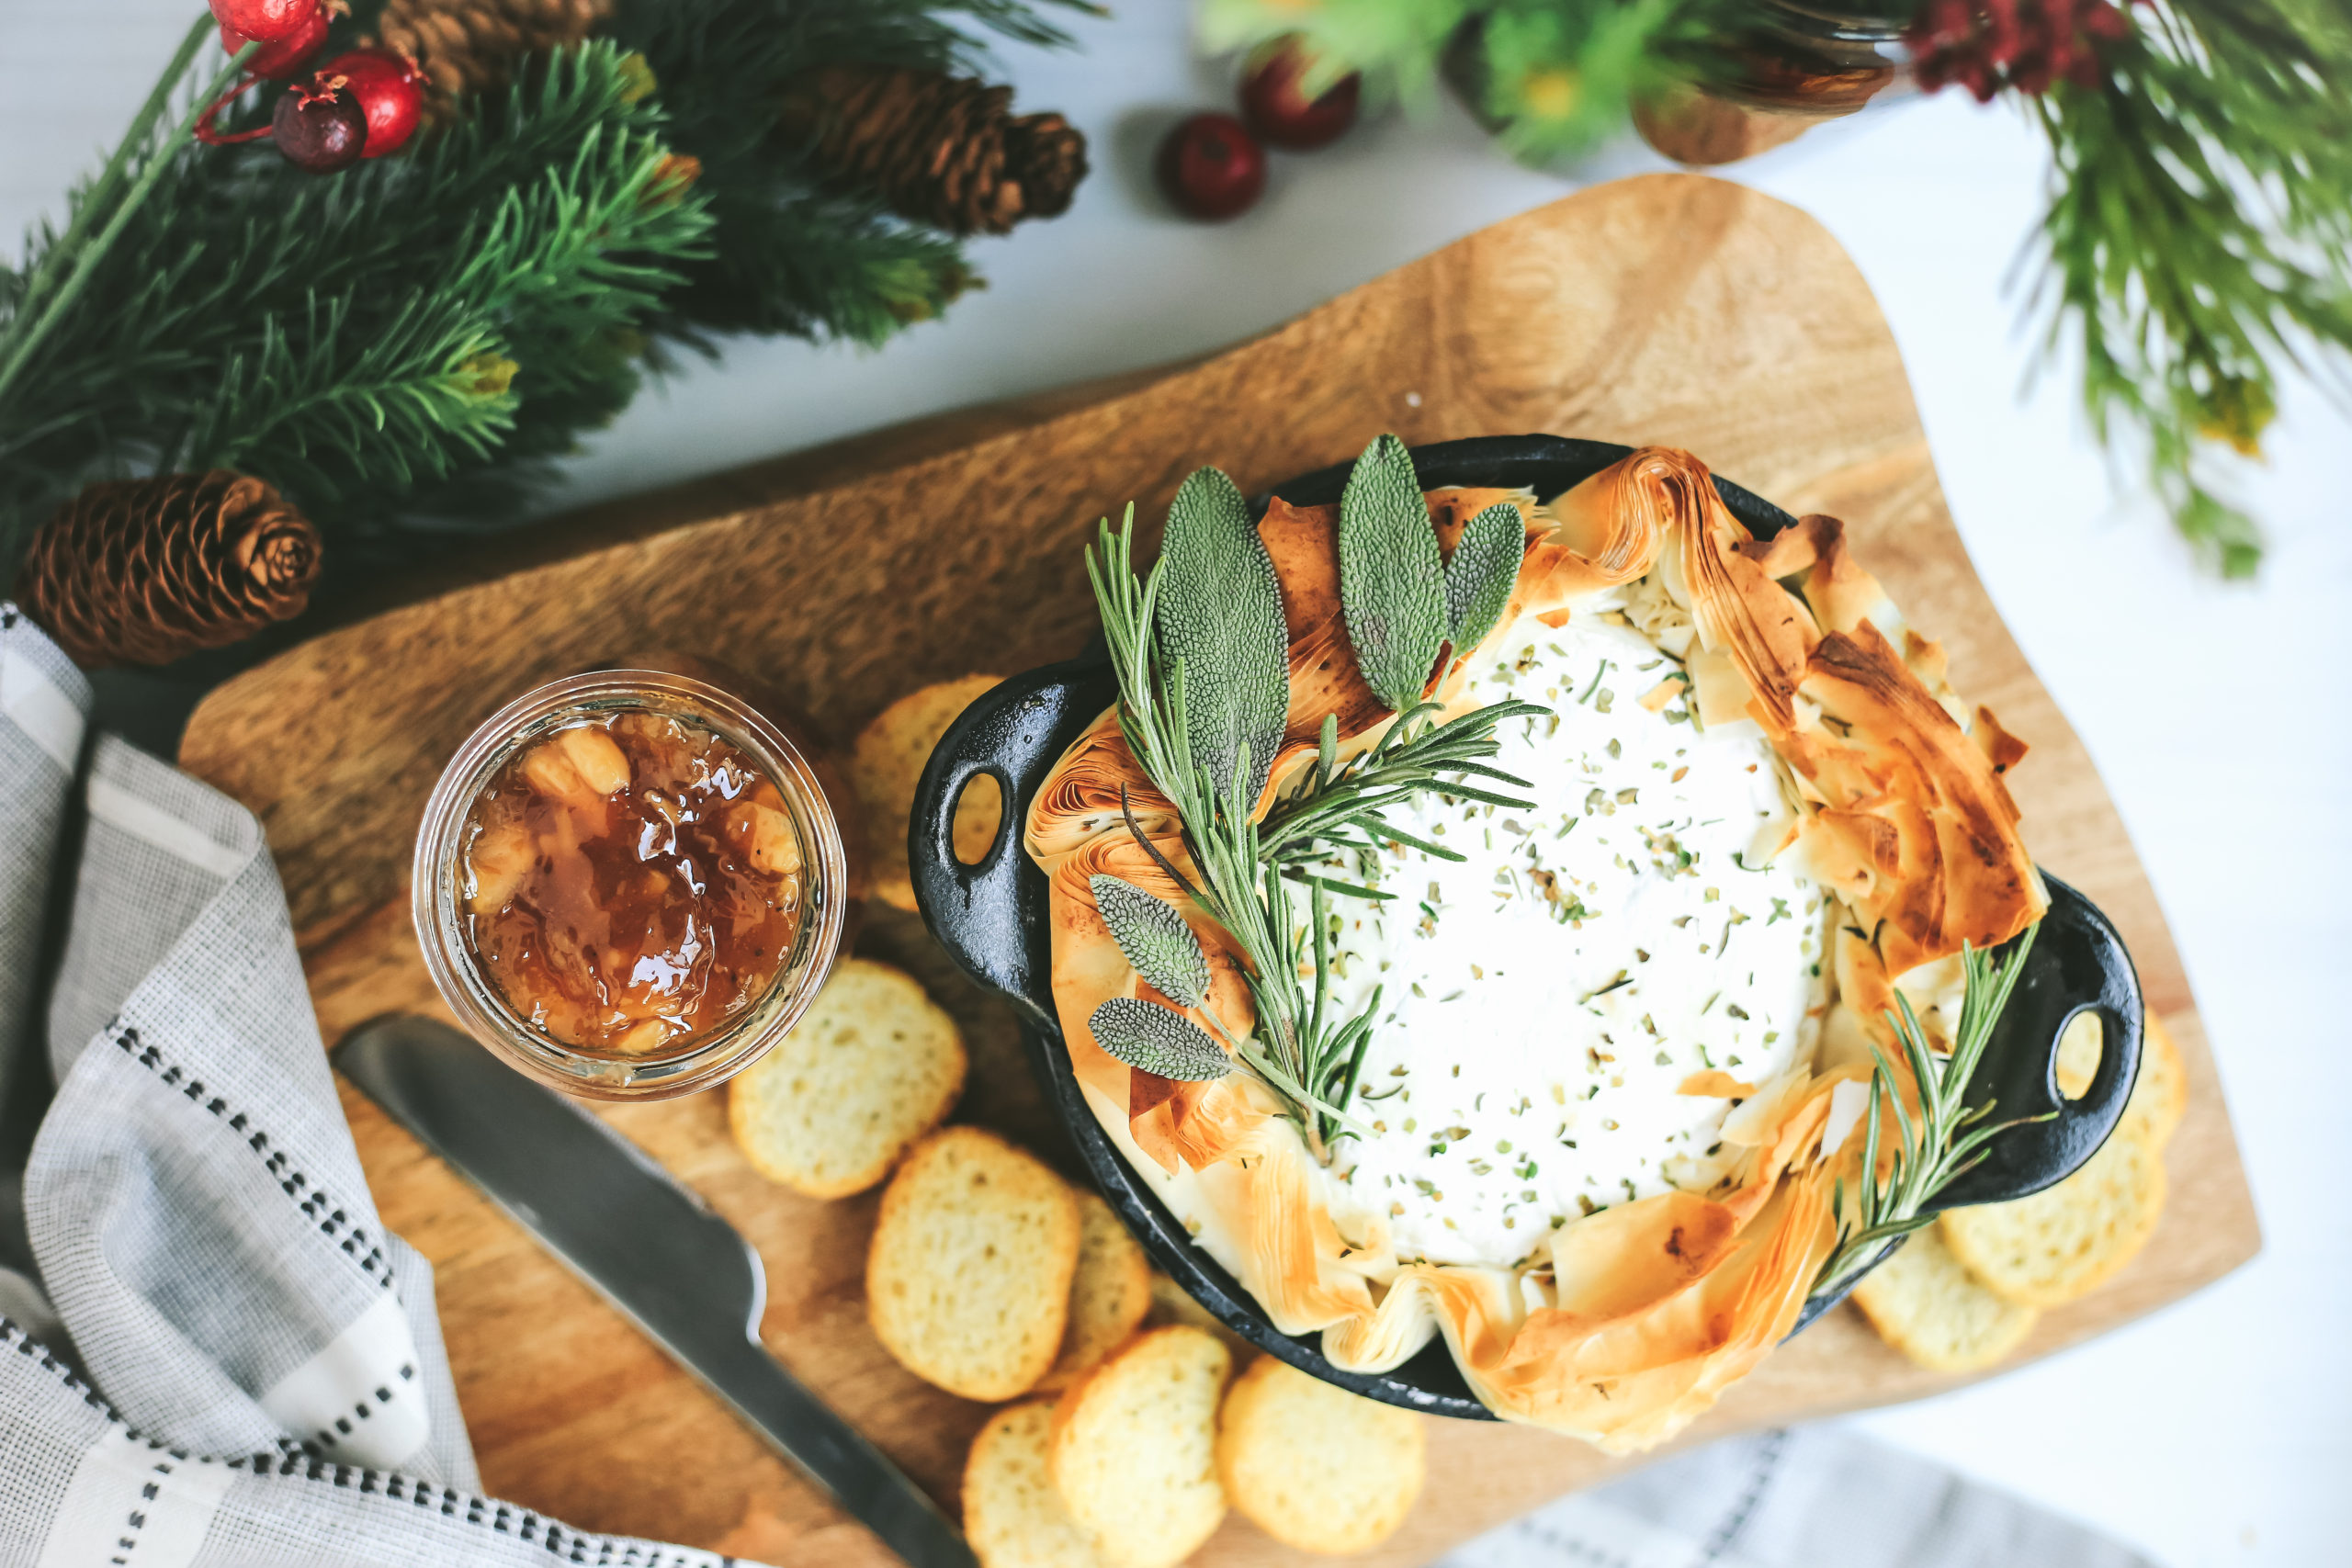 Baked Brie in phyllo dough with herbs, peach jam, and seasonal decorations, served on a wooden platter